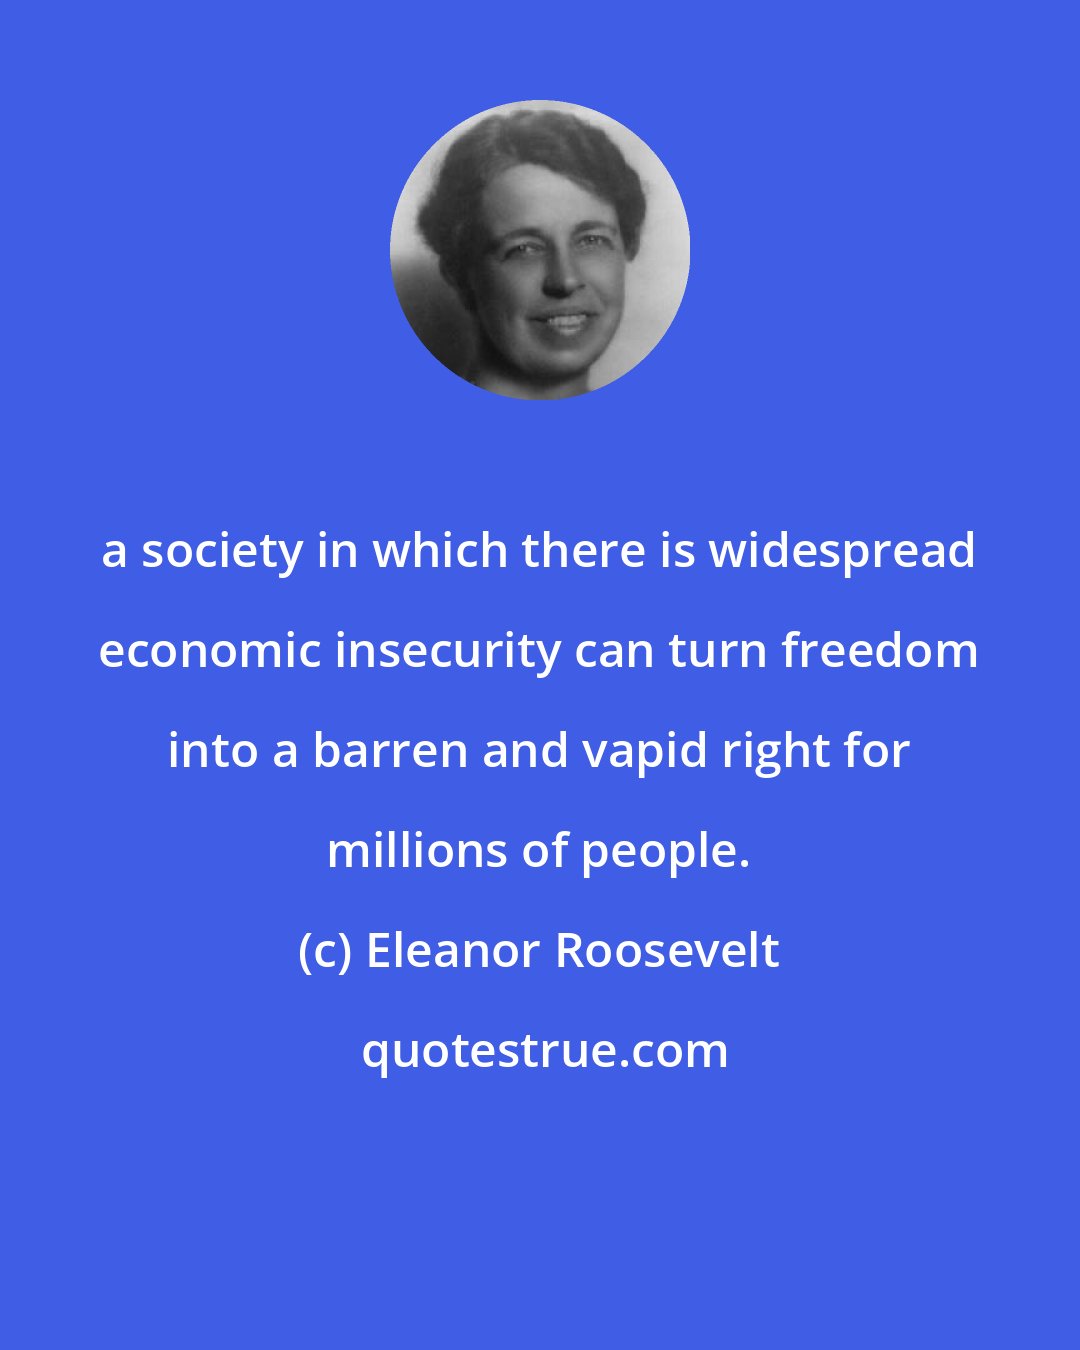 Eleanor Roosevelt: a society in which there is widespread economic insecurity can turn freedom into a barren and vapid right for millions of people.